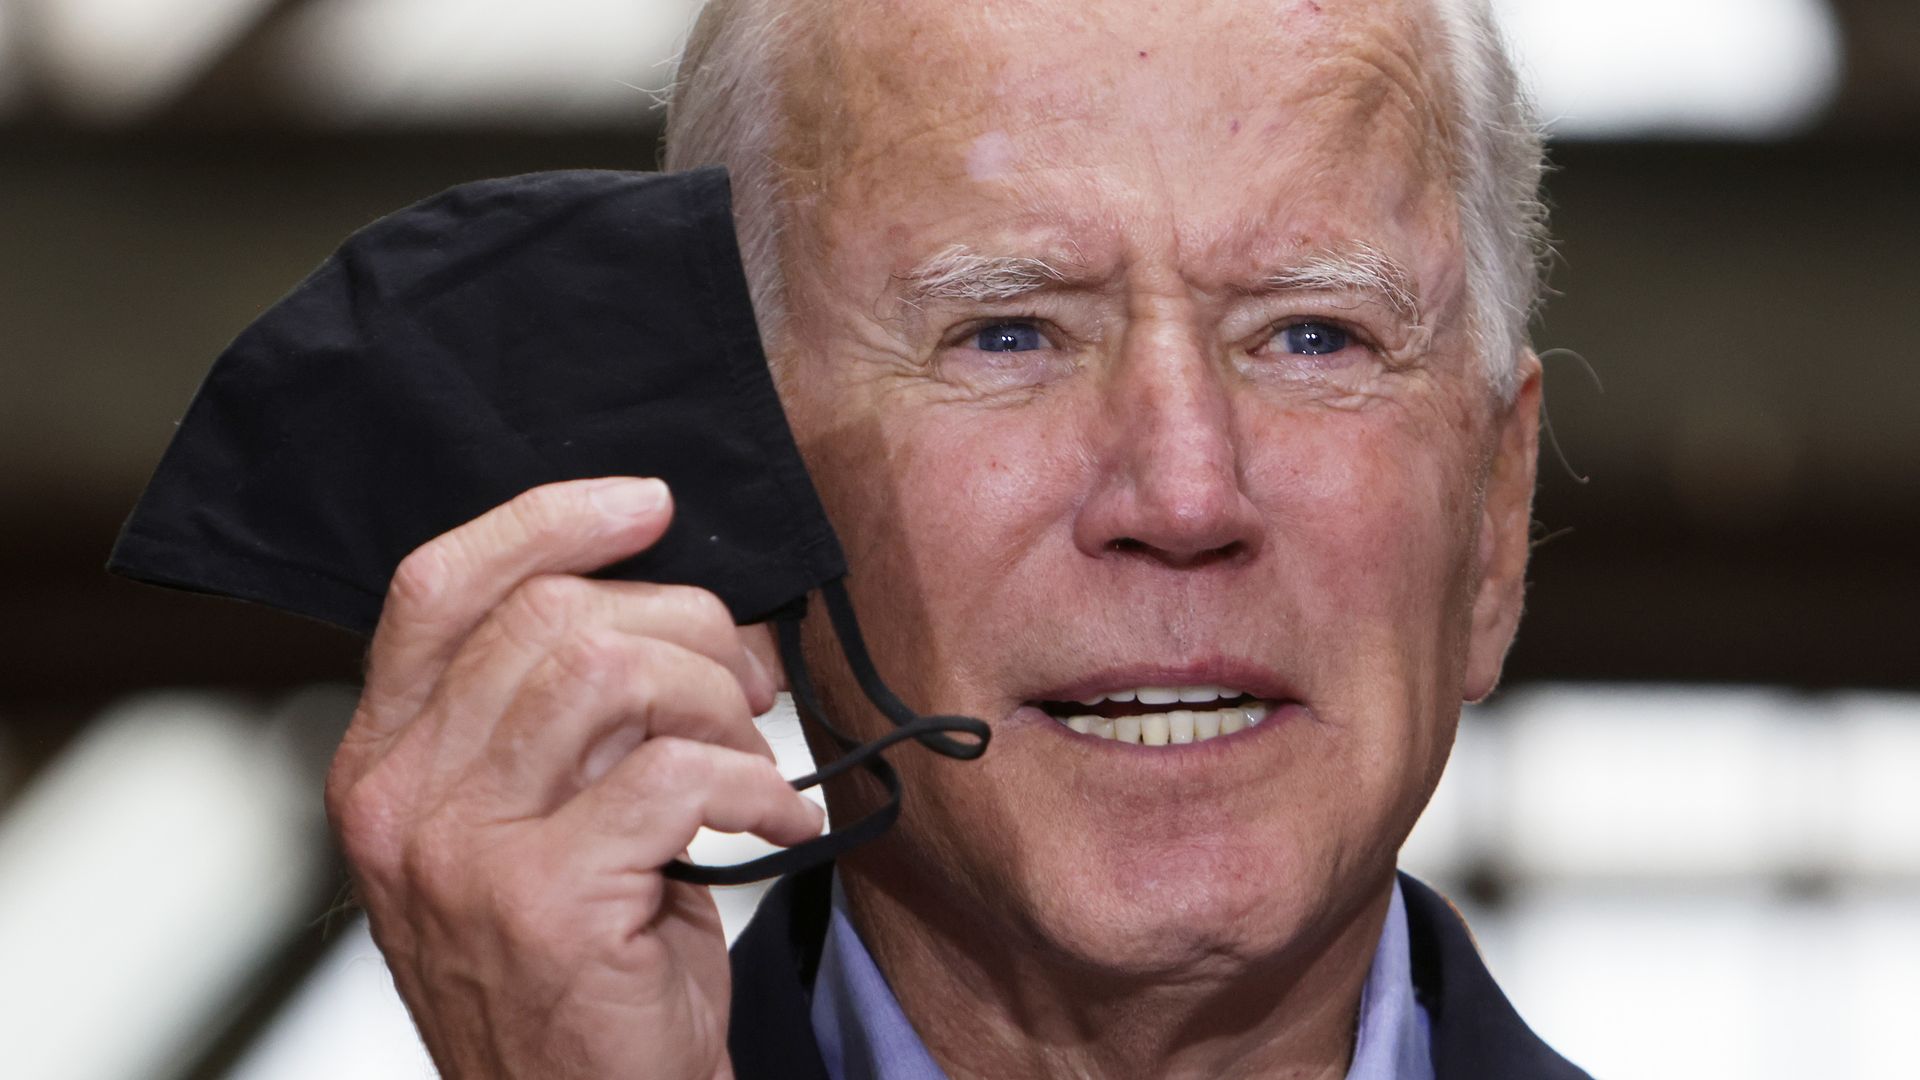 Joe Biden with a mask in his right hand next to his face